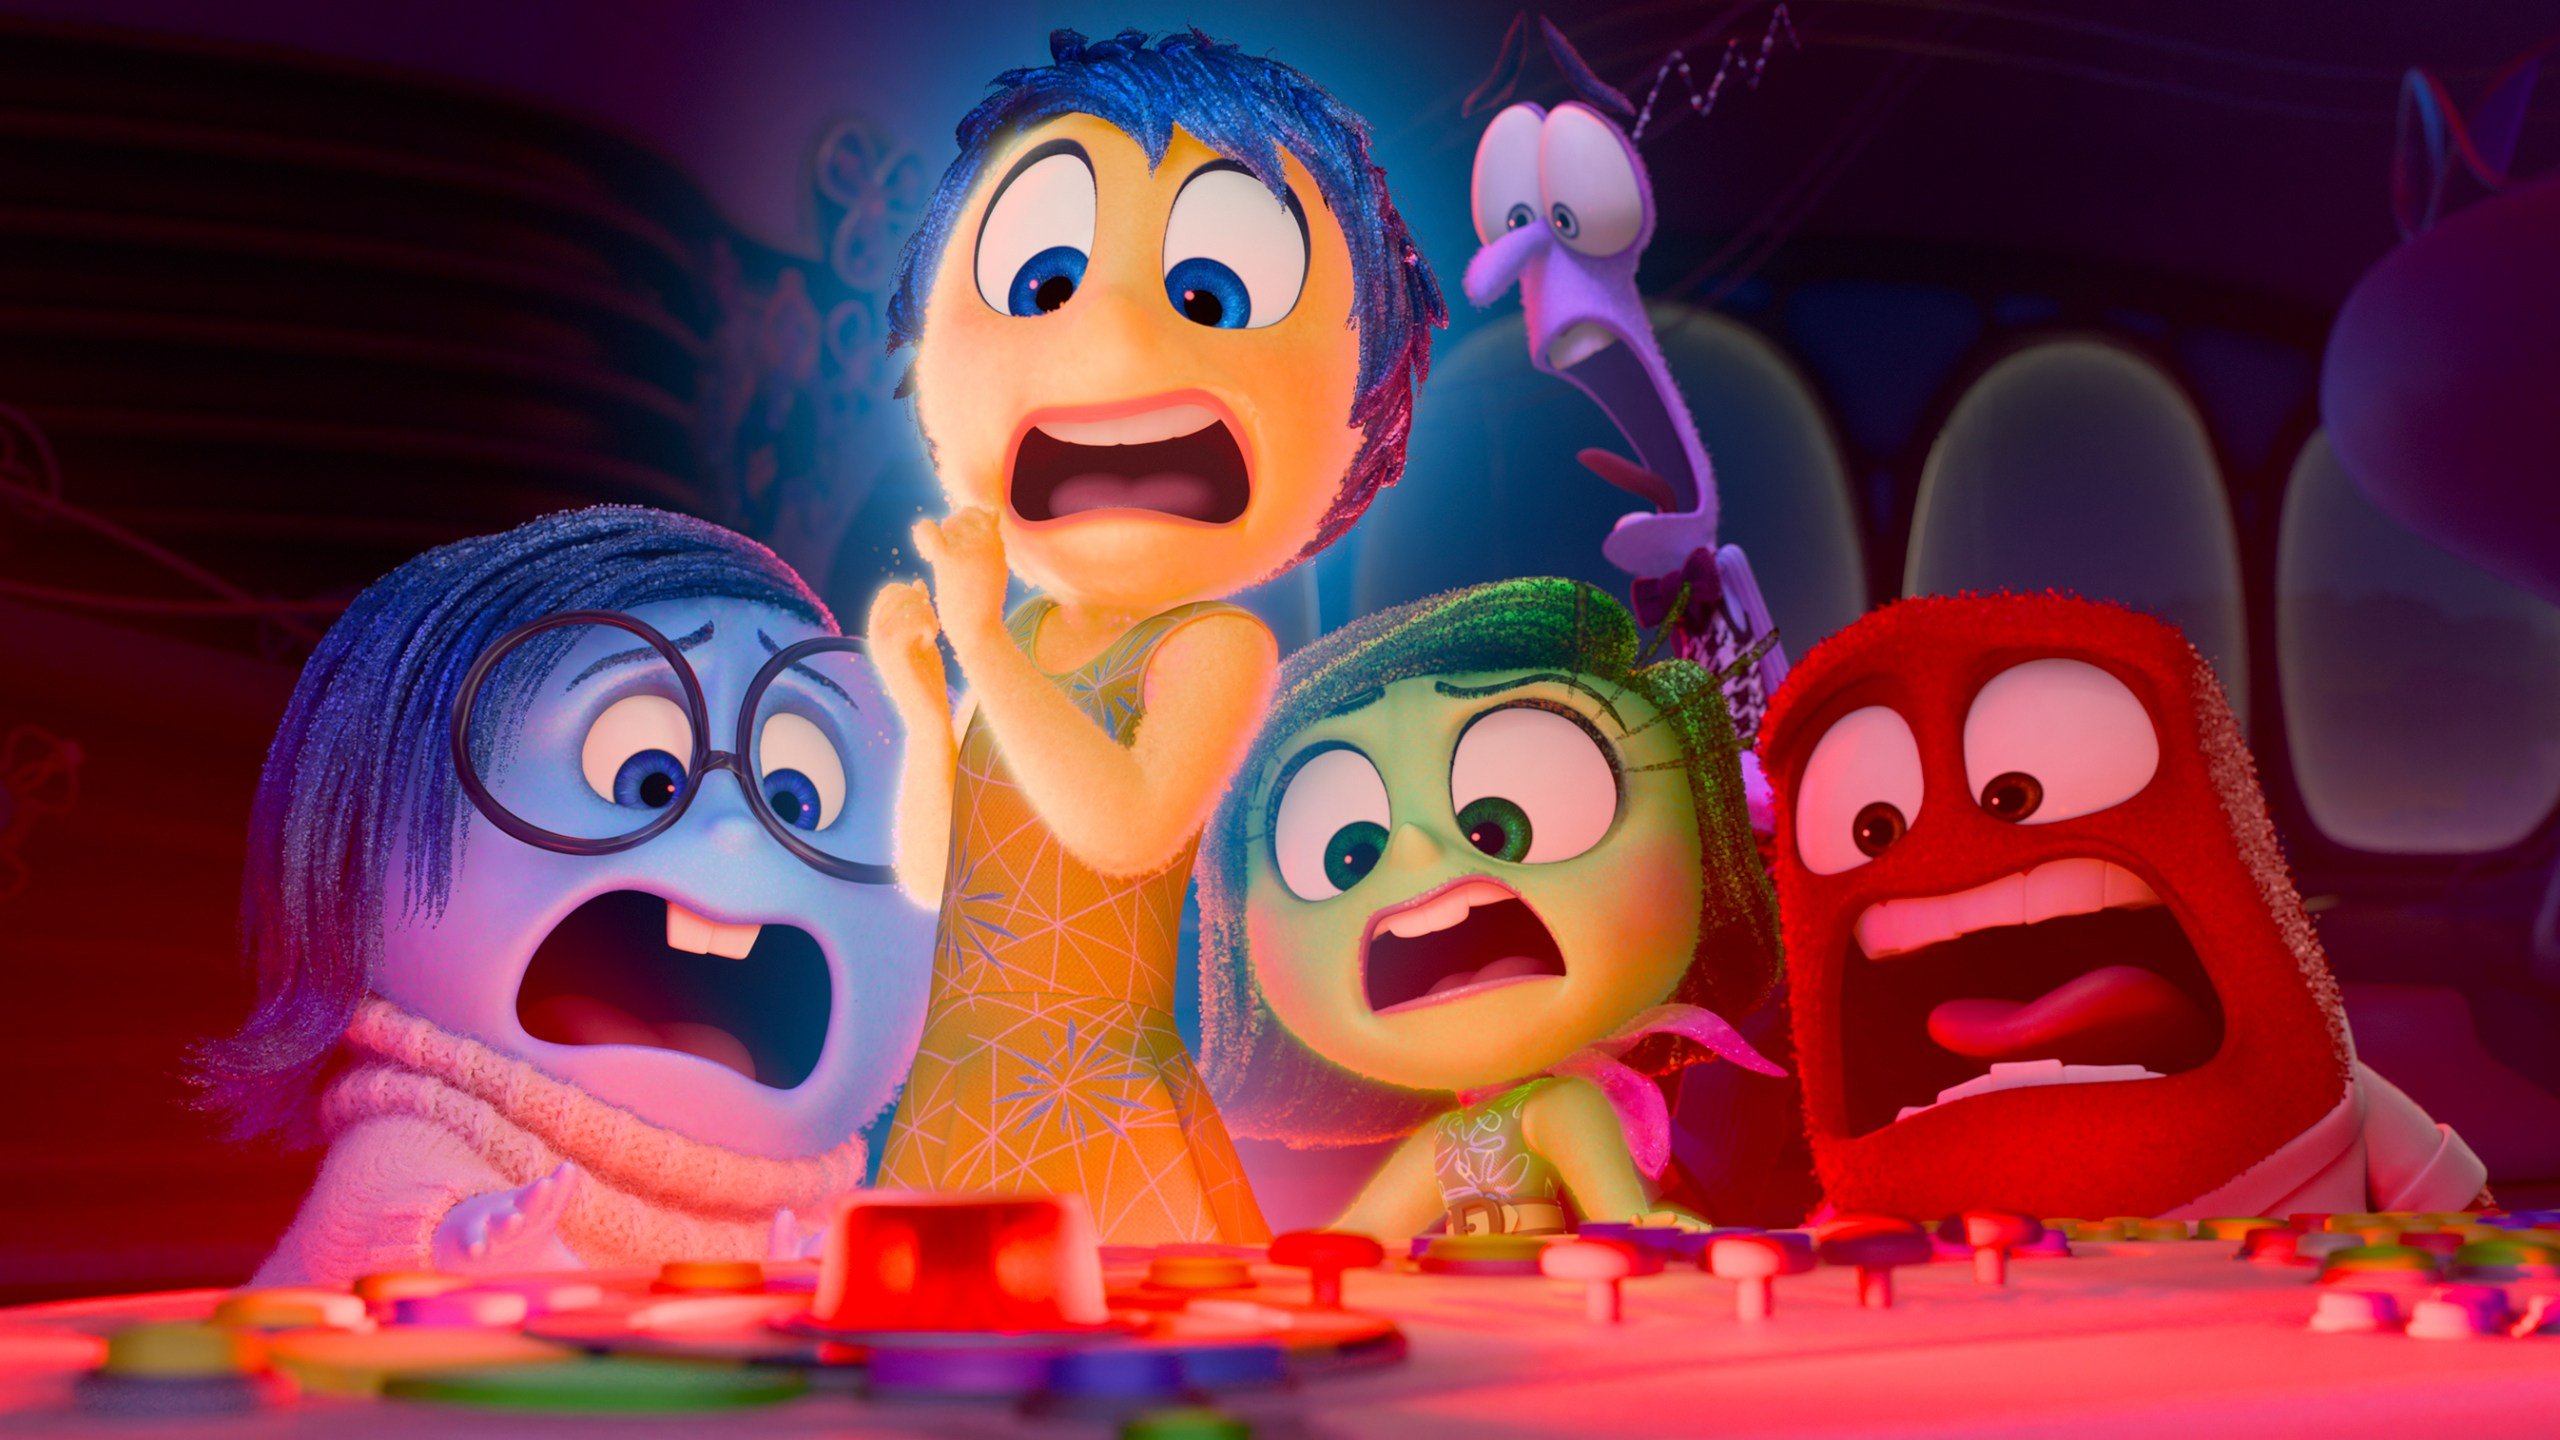 Inside Out 2' scores $100M in its